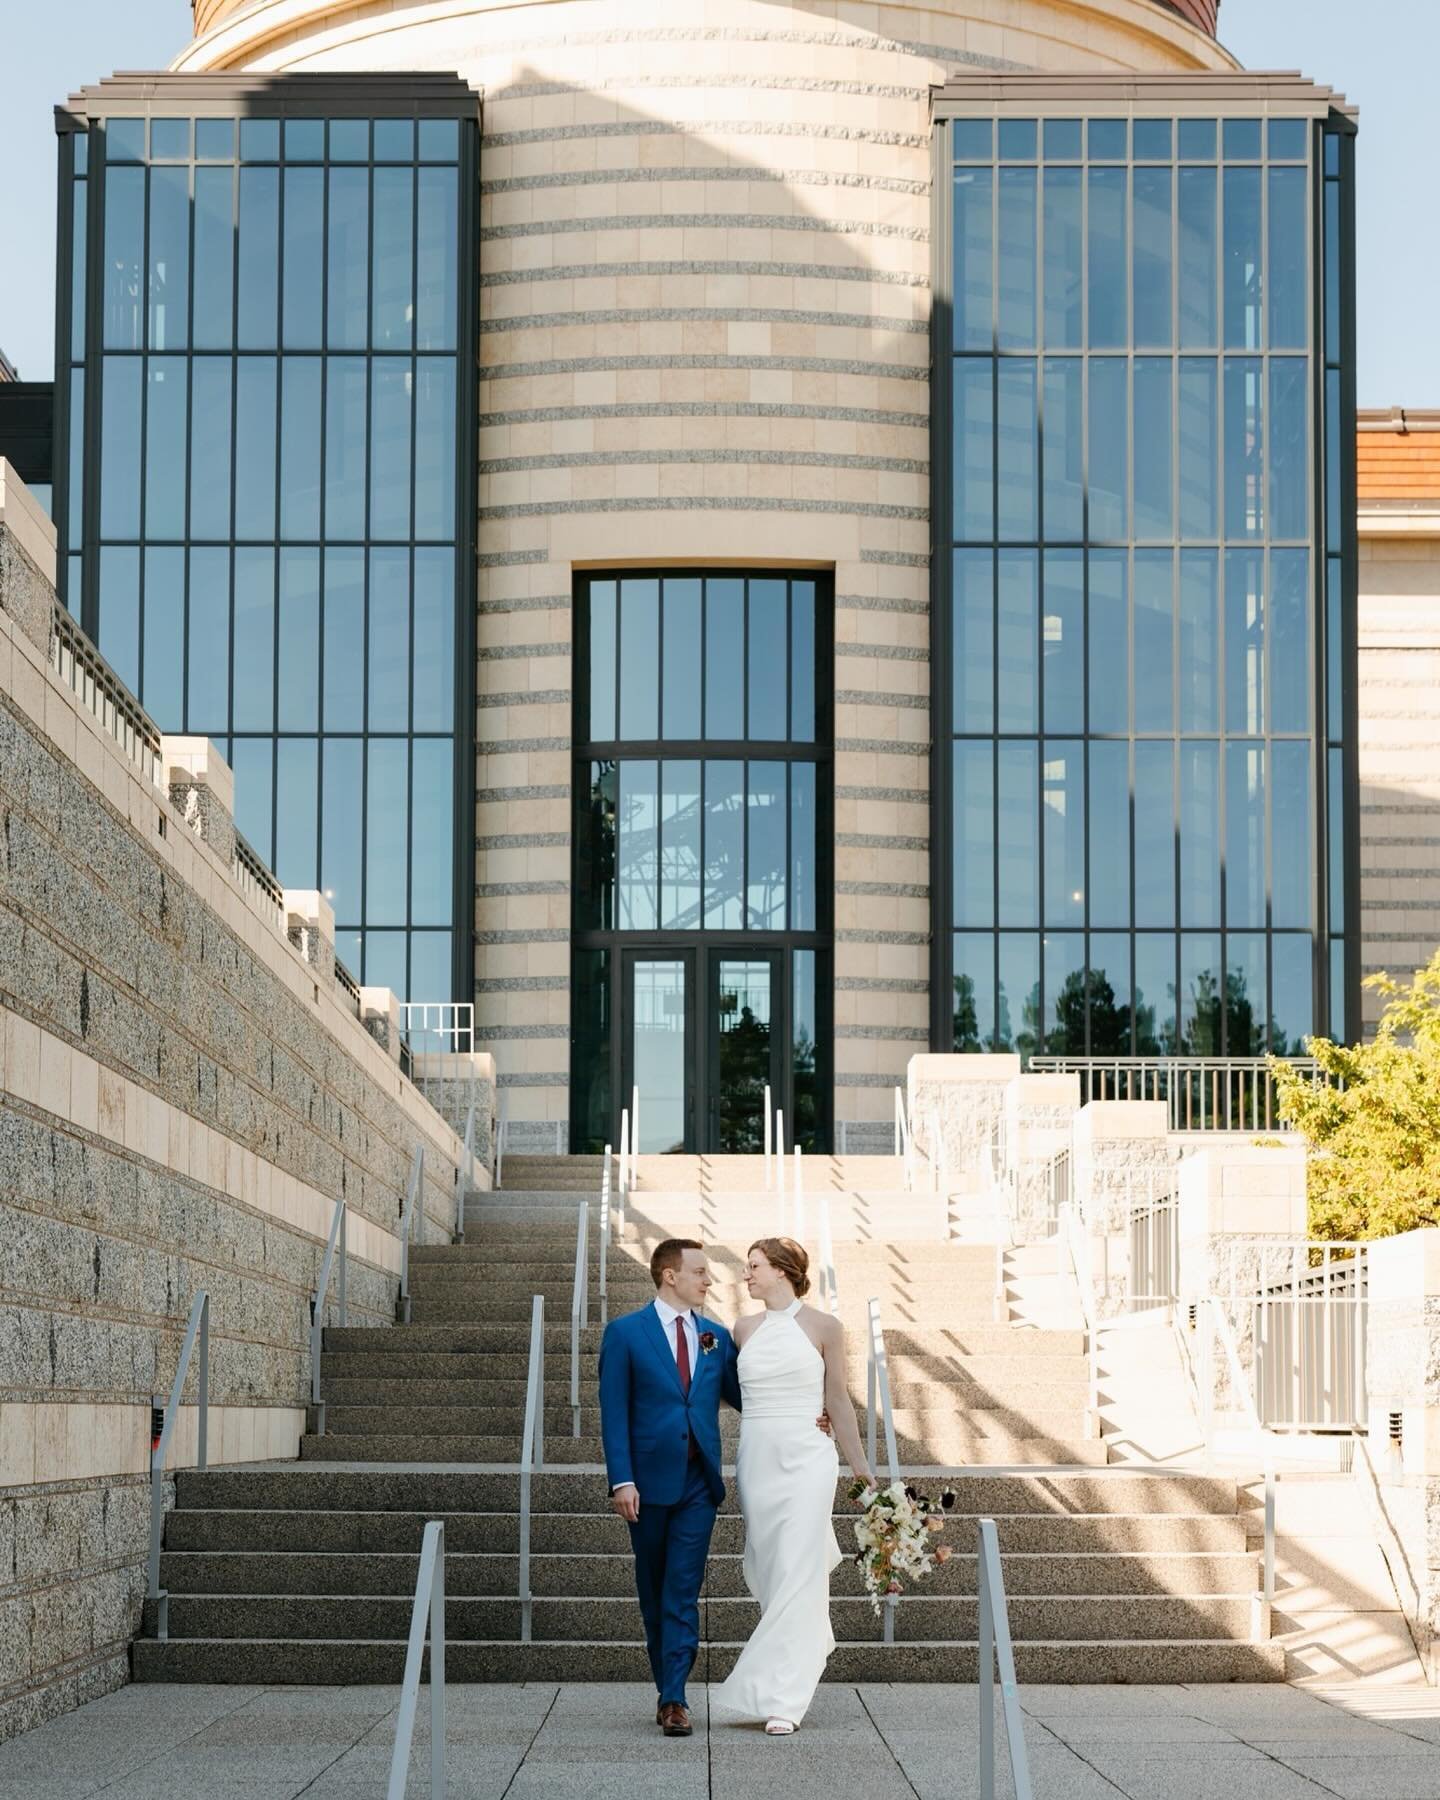 This weekend Ann &amp; Josh got married in Minnesota! I don&rsquo;t get to photograph many weddings in Minnesota (where I&rsquo;m from) so this day felt extra special &amp; there were so many extra MN moments - getting ready in Minneapolis, a walk pa